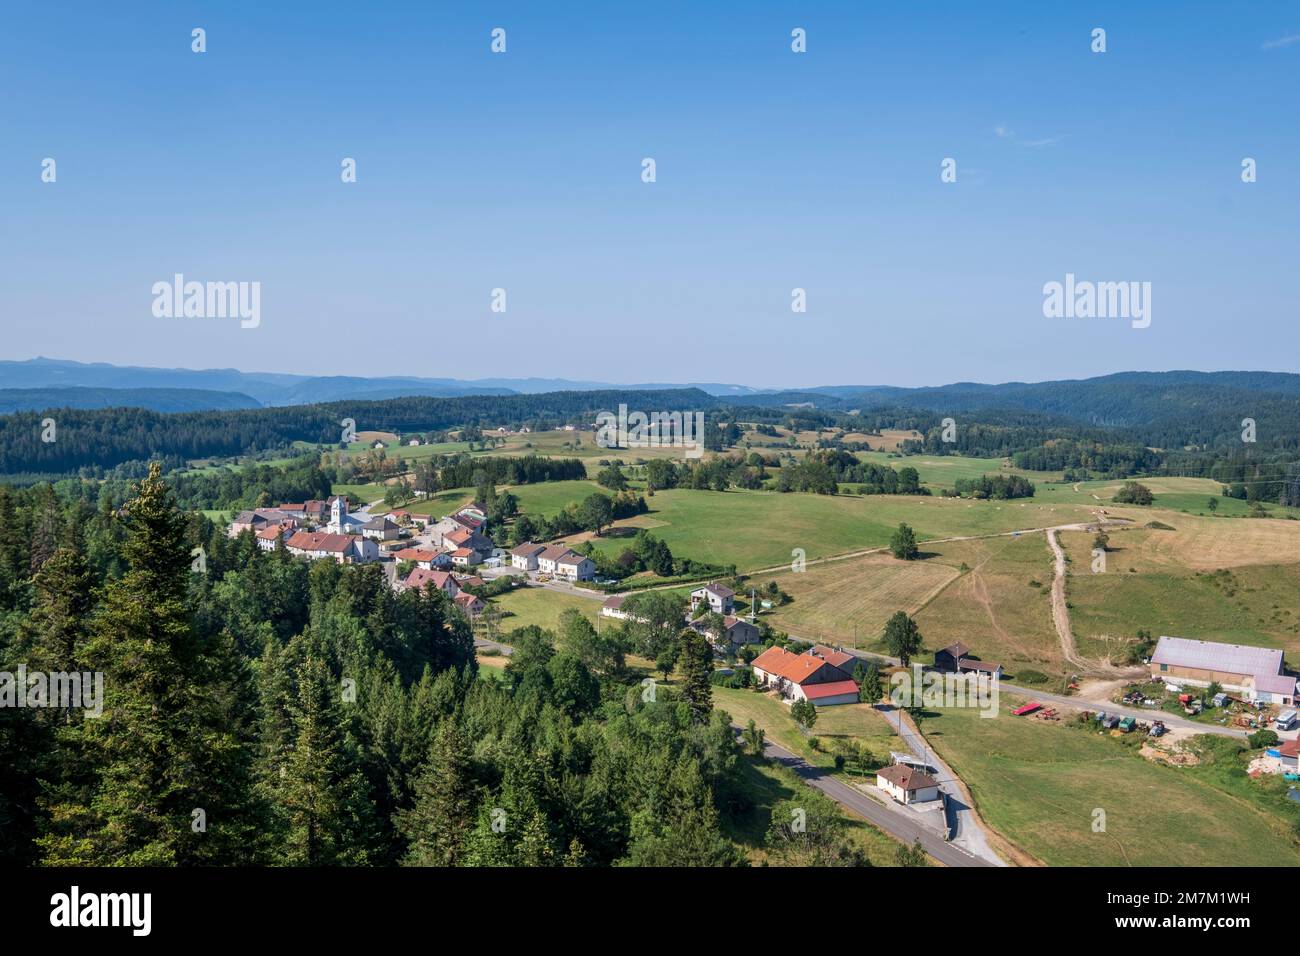 Grande-Riviere Chateau, Chateau-des-Pres (central-eastern France): panoramic view of the countryside, the village, the upper part of the Jura departme Stock Photo